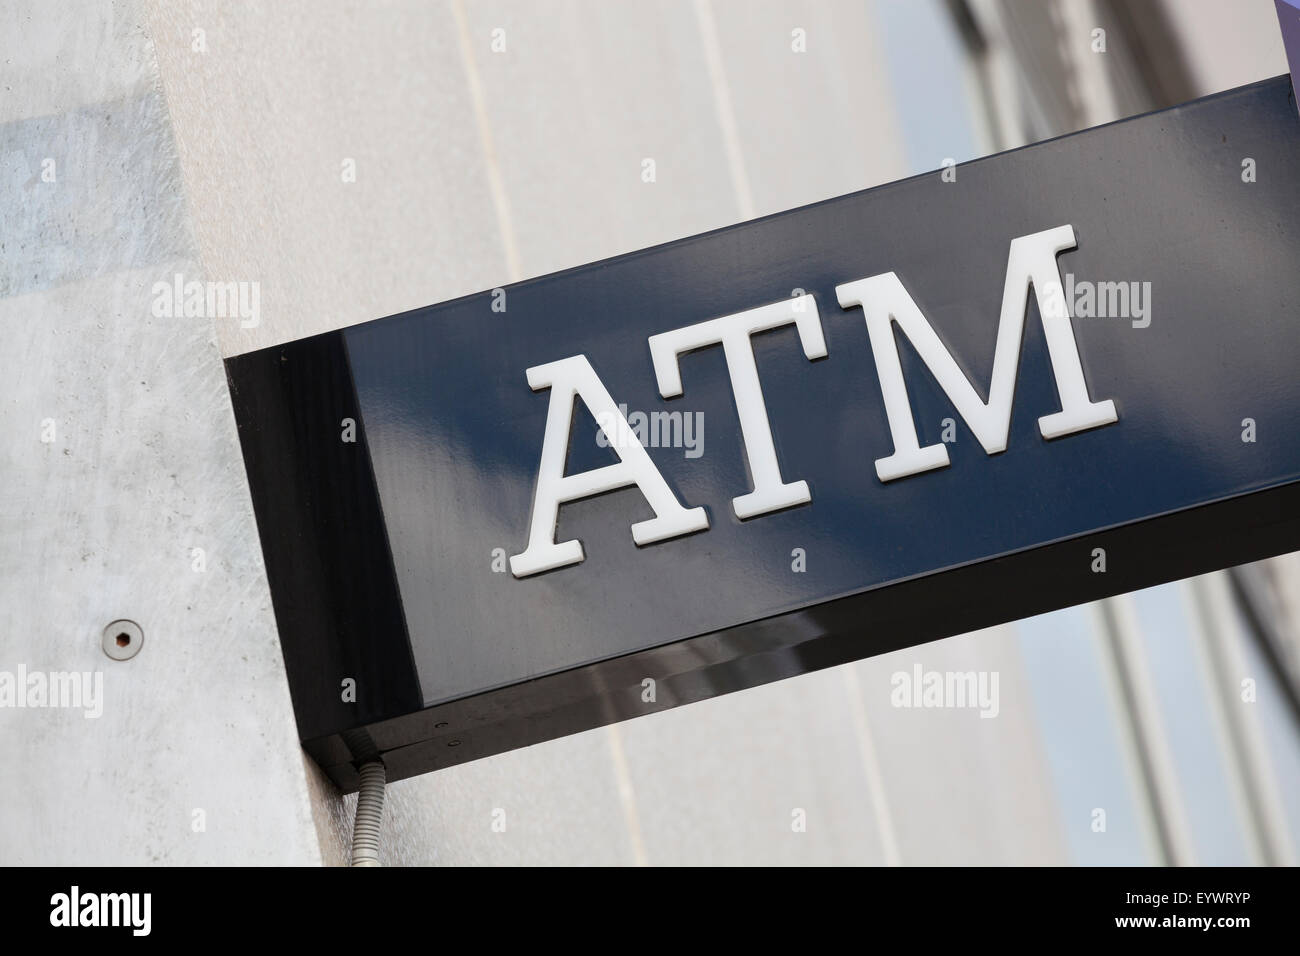 ATM sign Stock Photo